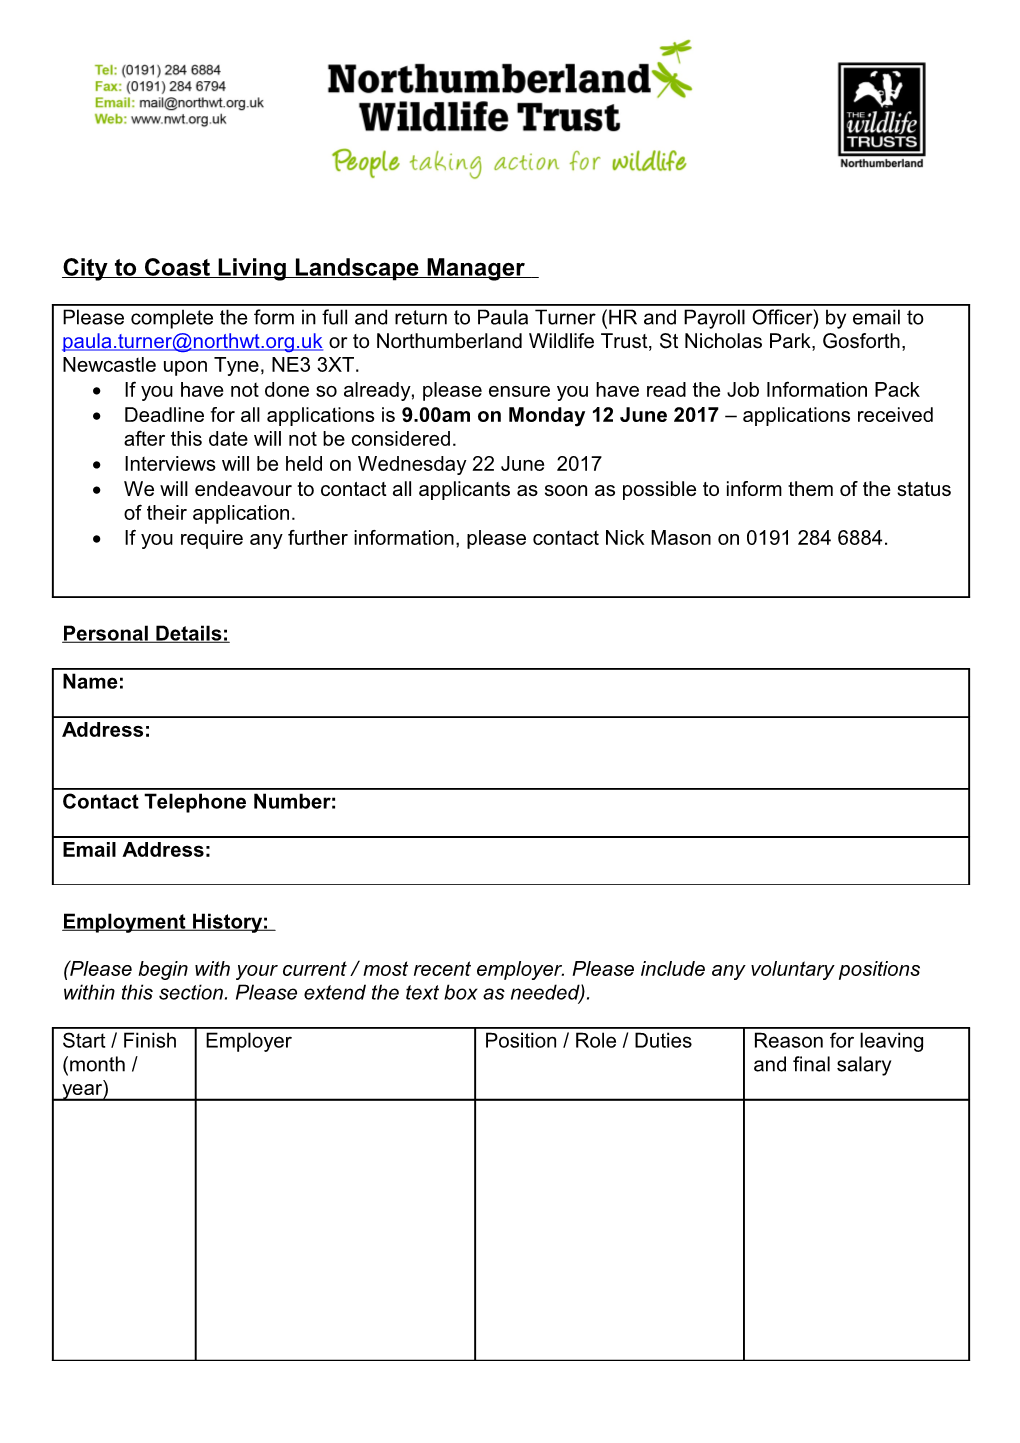 City to Coast Living Landscape Manager